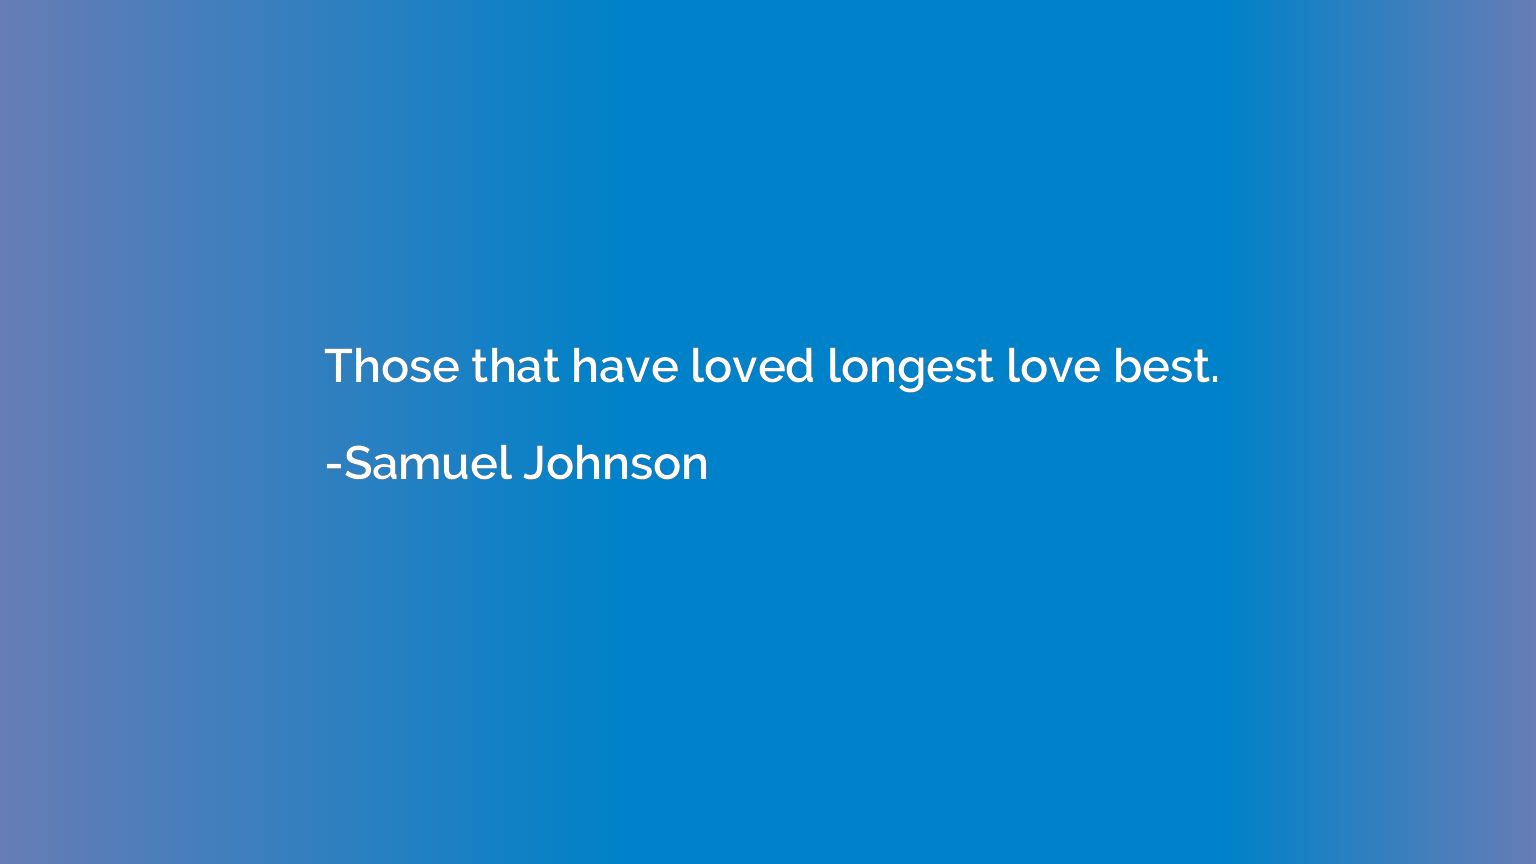 Those that have loved longest love best.